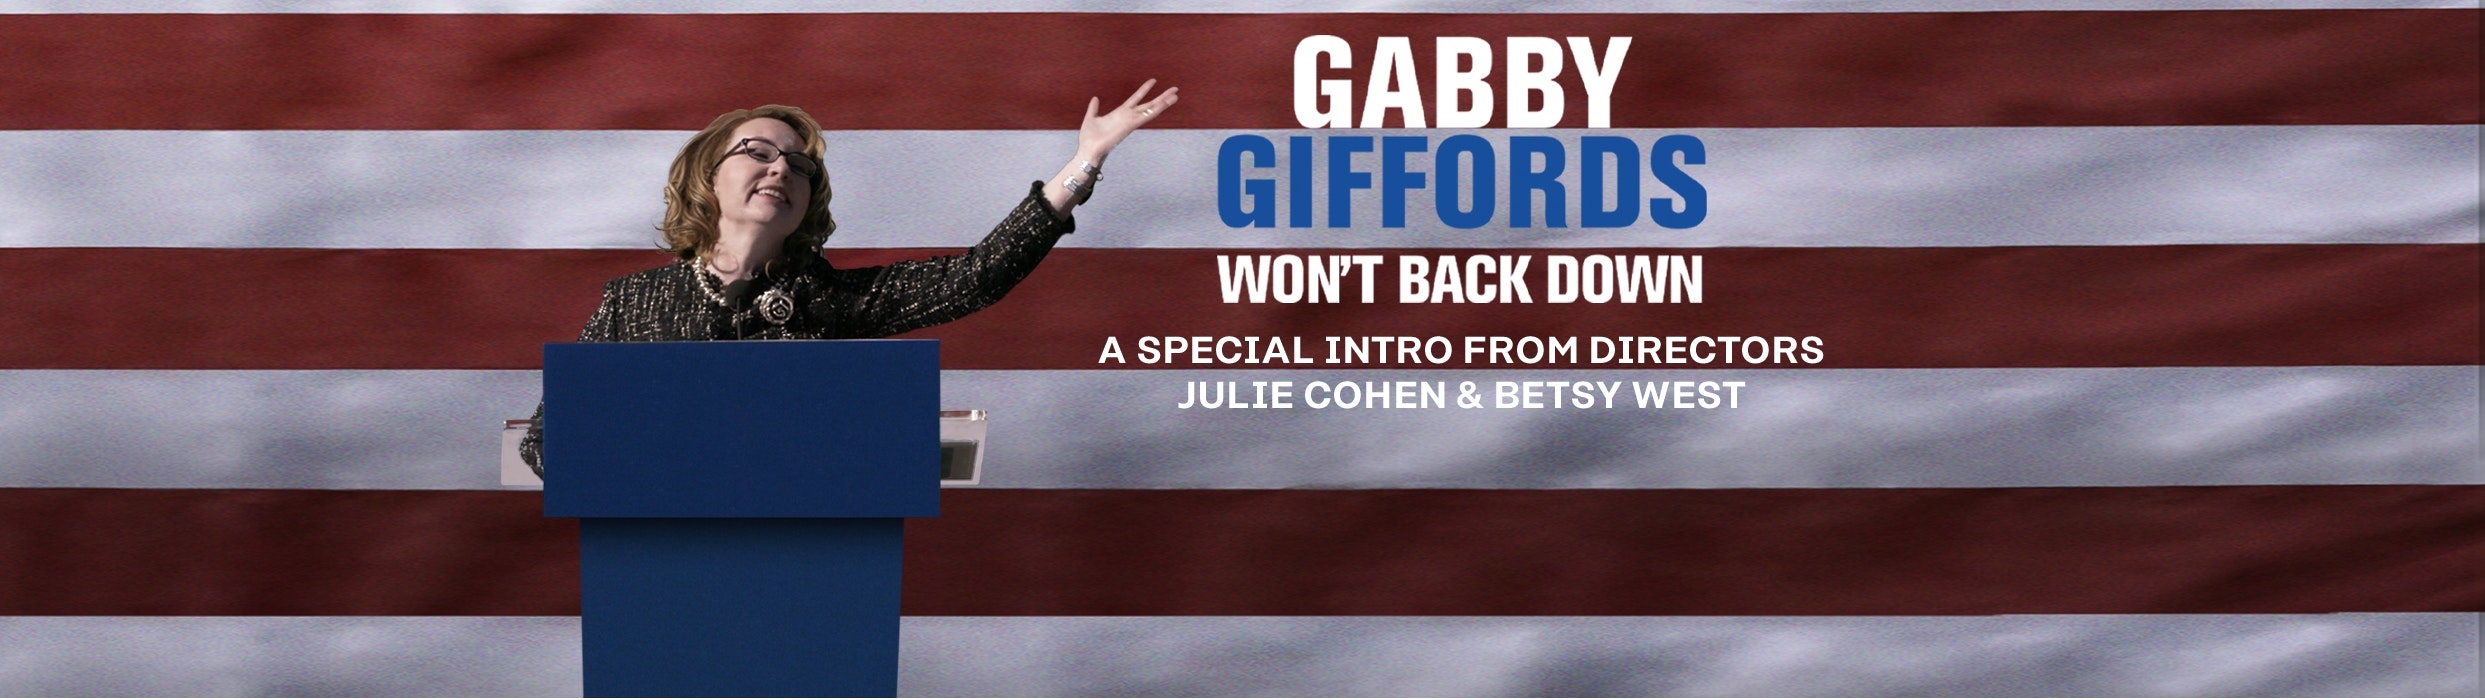 Gabby Giffords Won't Back Down - background image